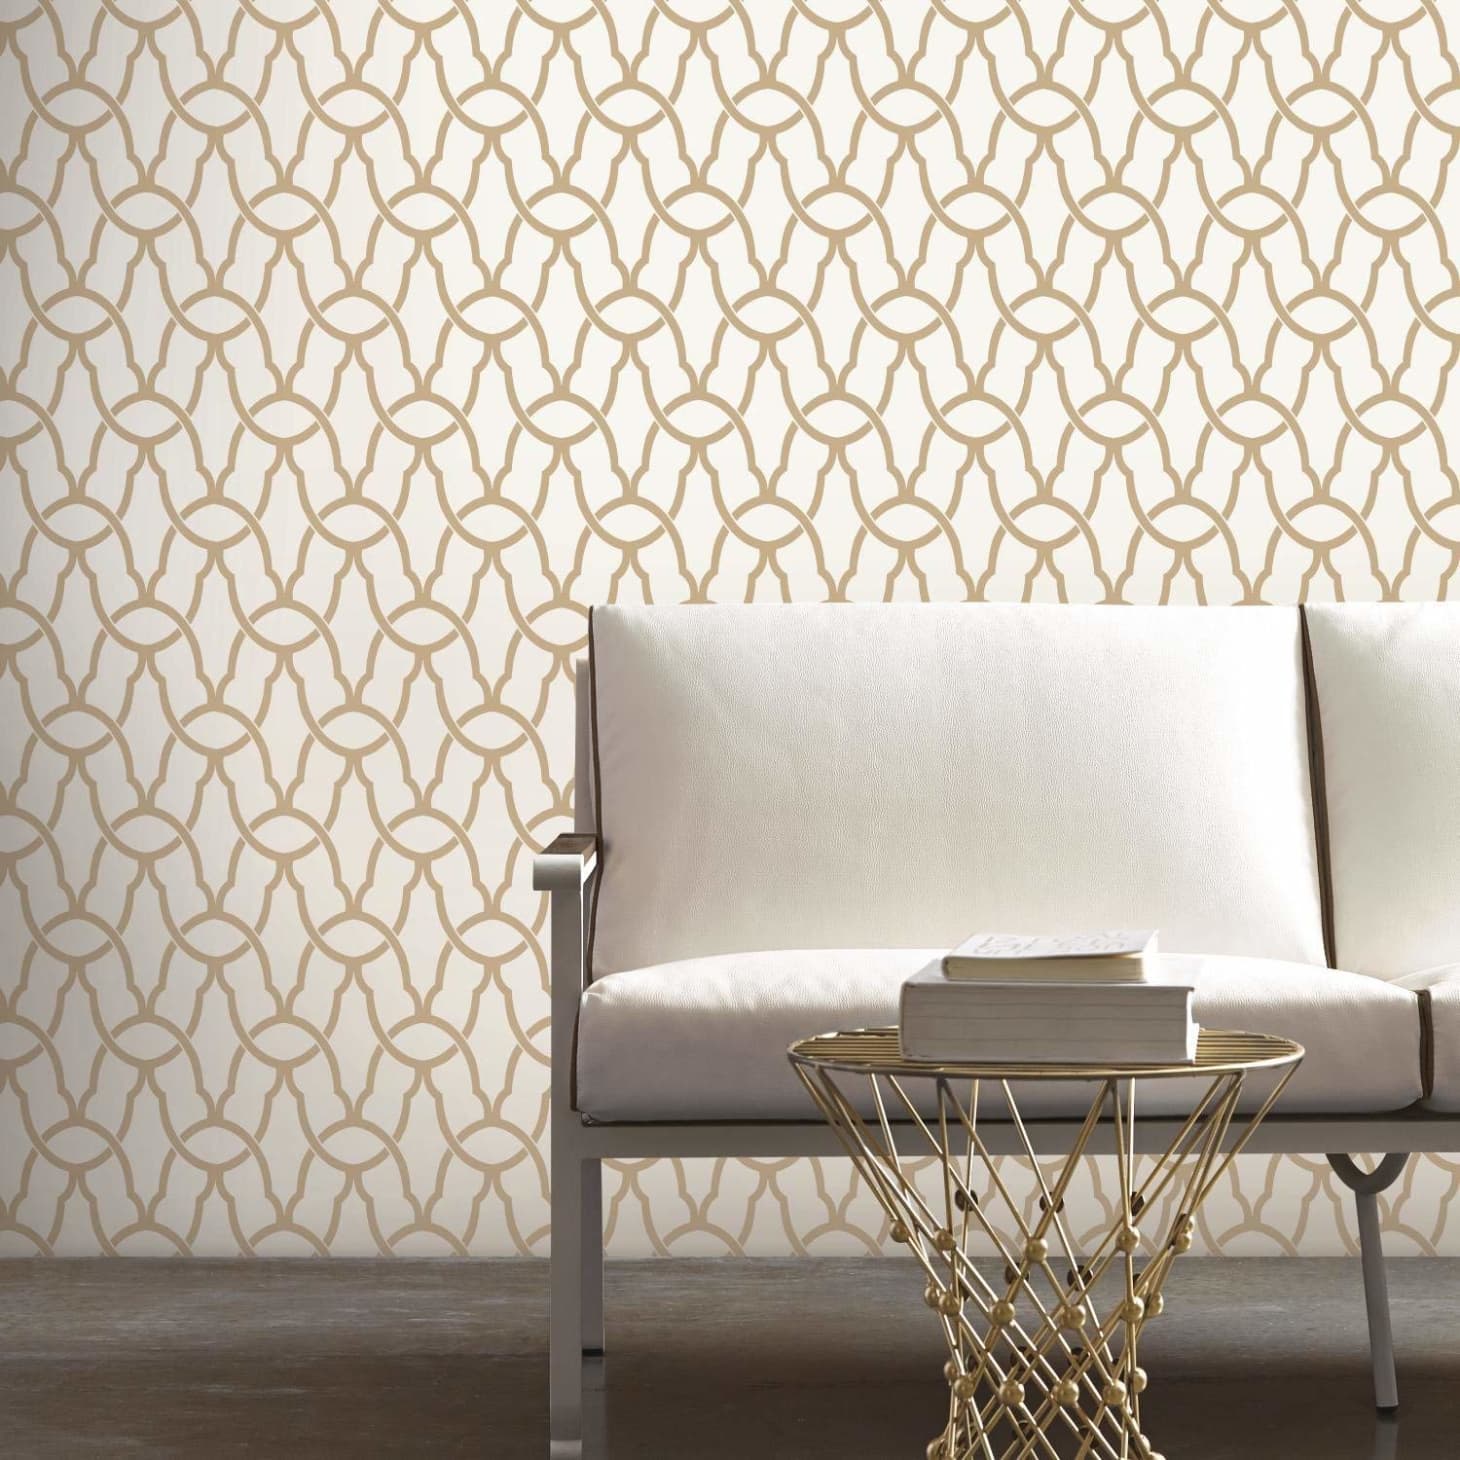 The Easiest Removable Patterned Wallpapers You Can Buy on Amazon